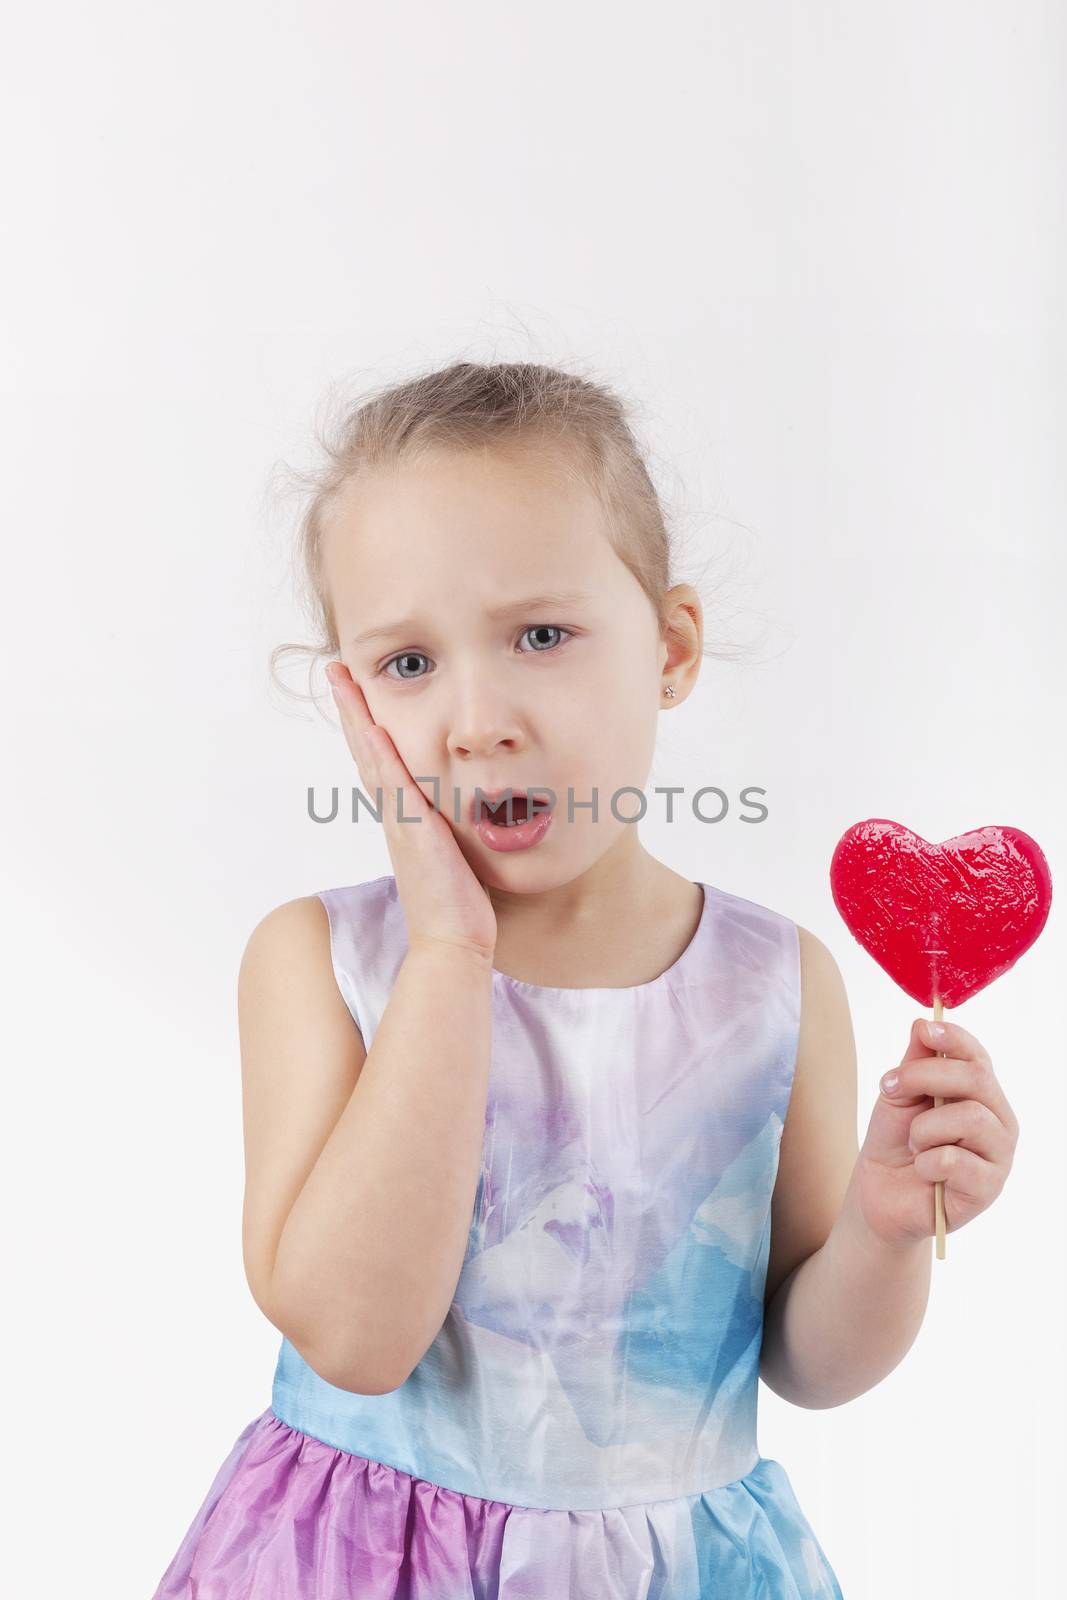 Toothache. Little girl with lollypop and hurt teeth holding her cheek.